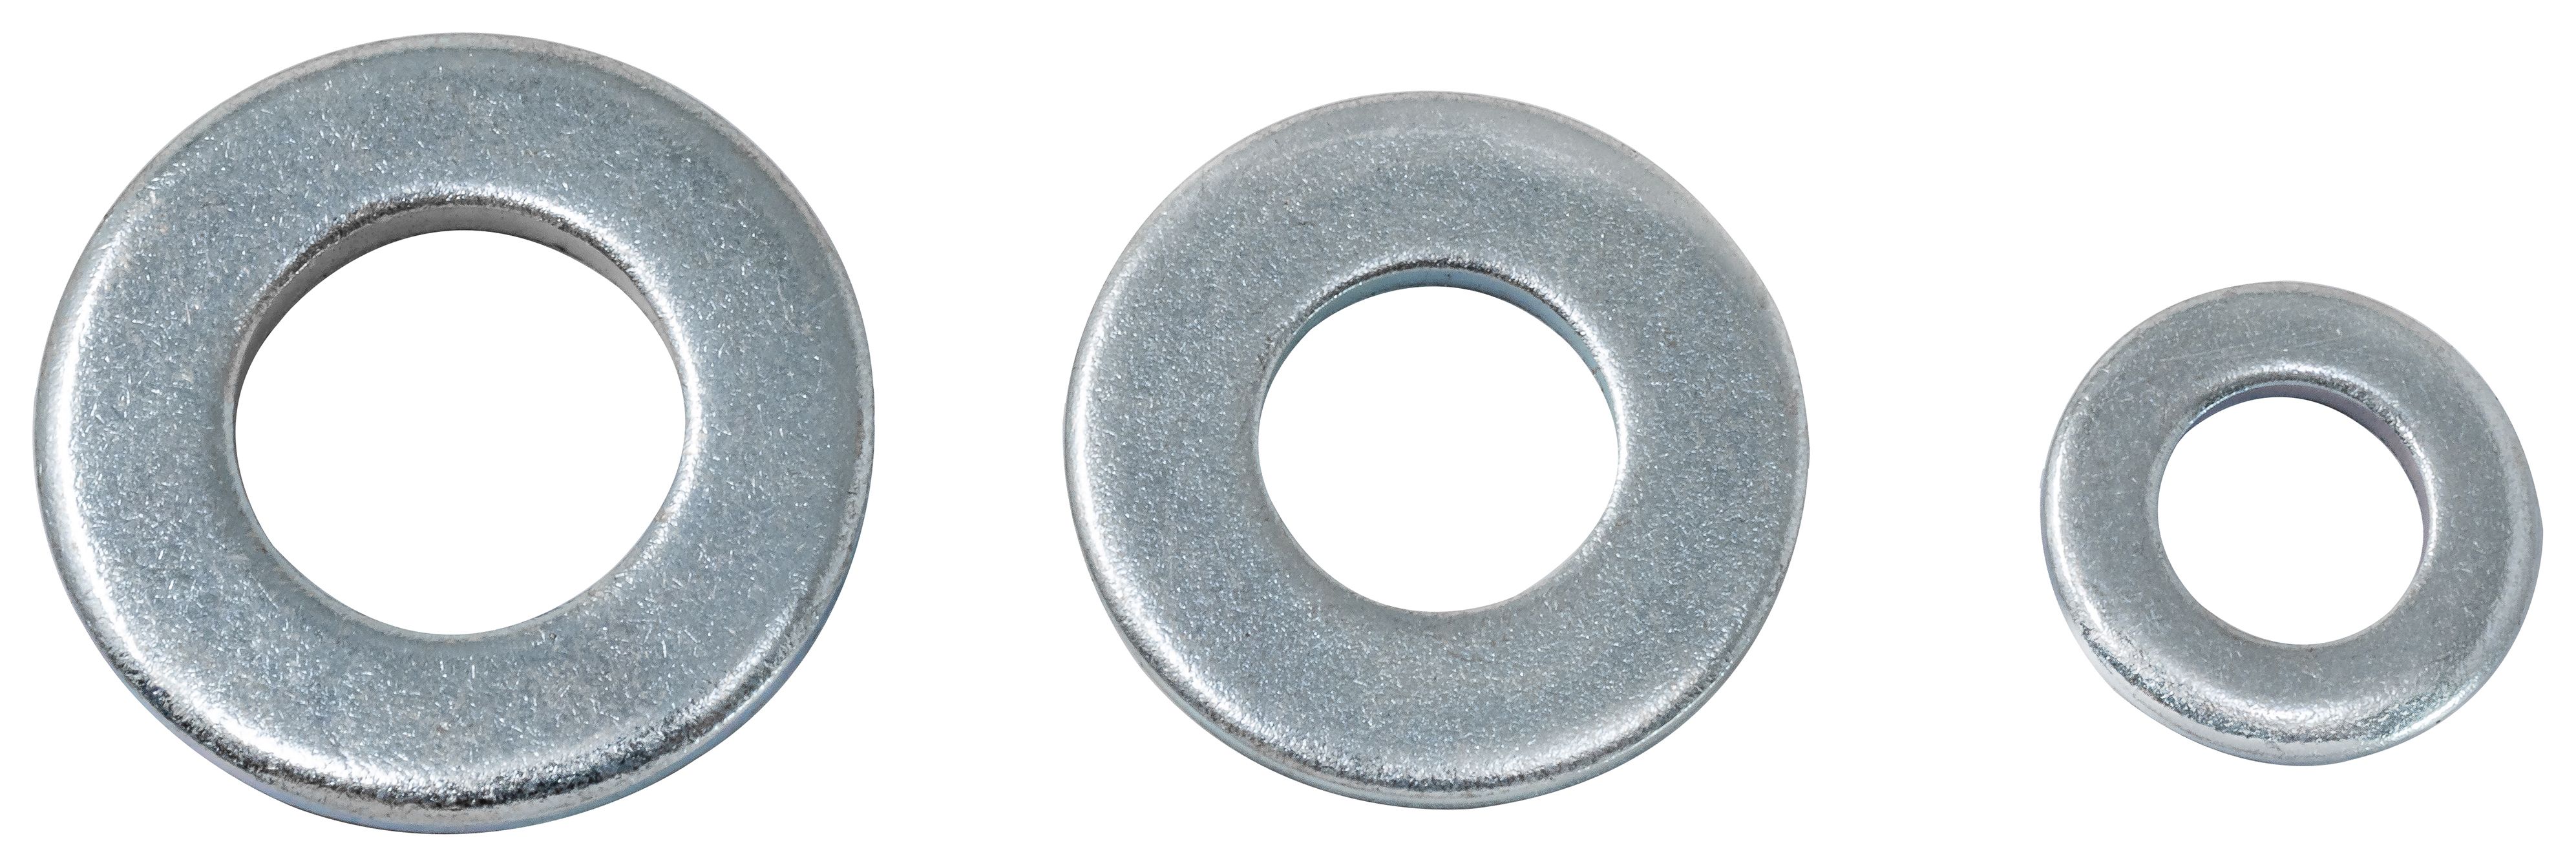 Wickes Assorted Washers - Pack of 100